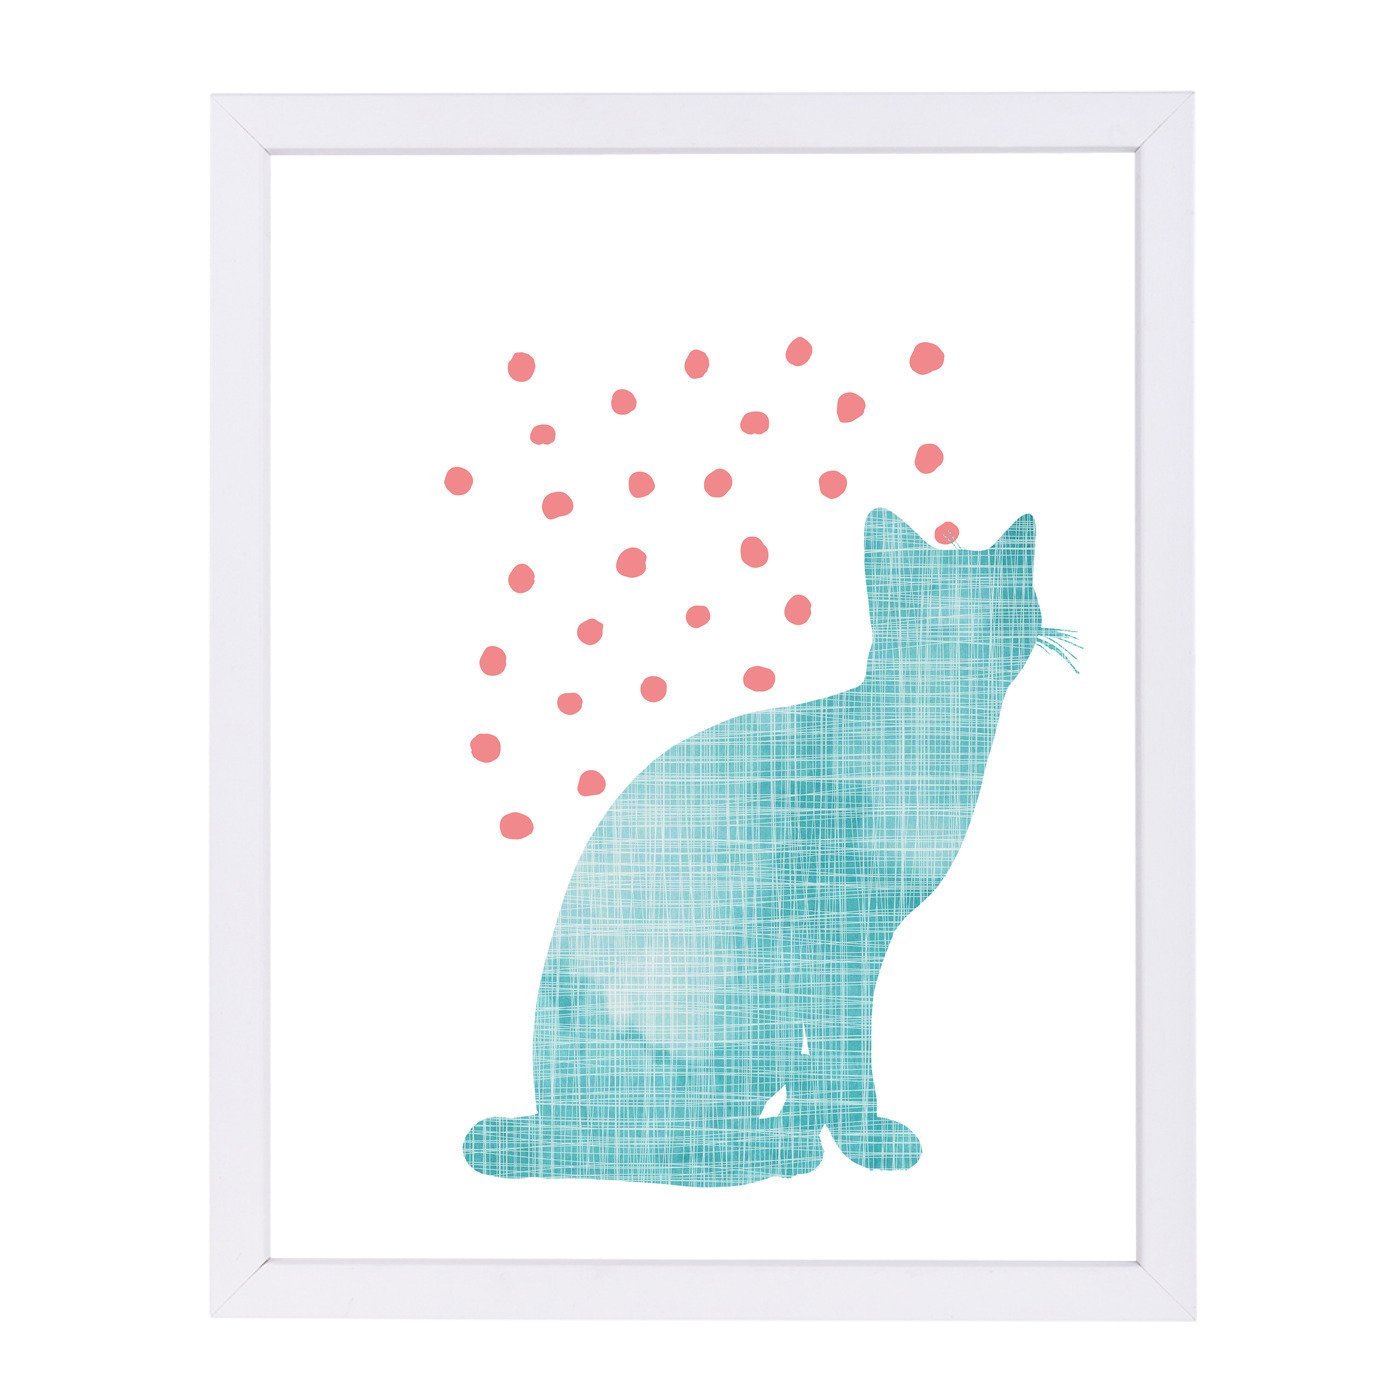 Catb5 by Ikonolexi Framed Print - Americanflat